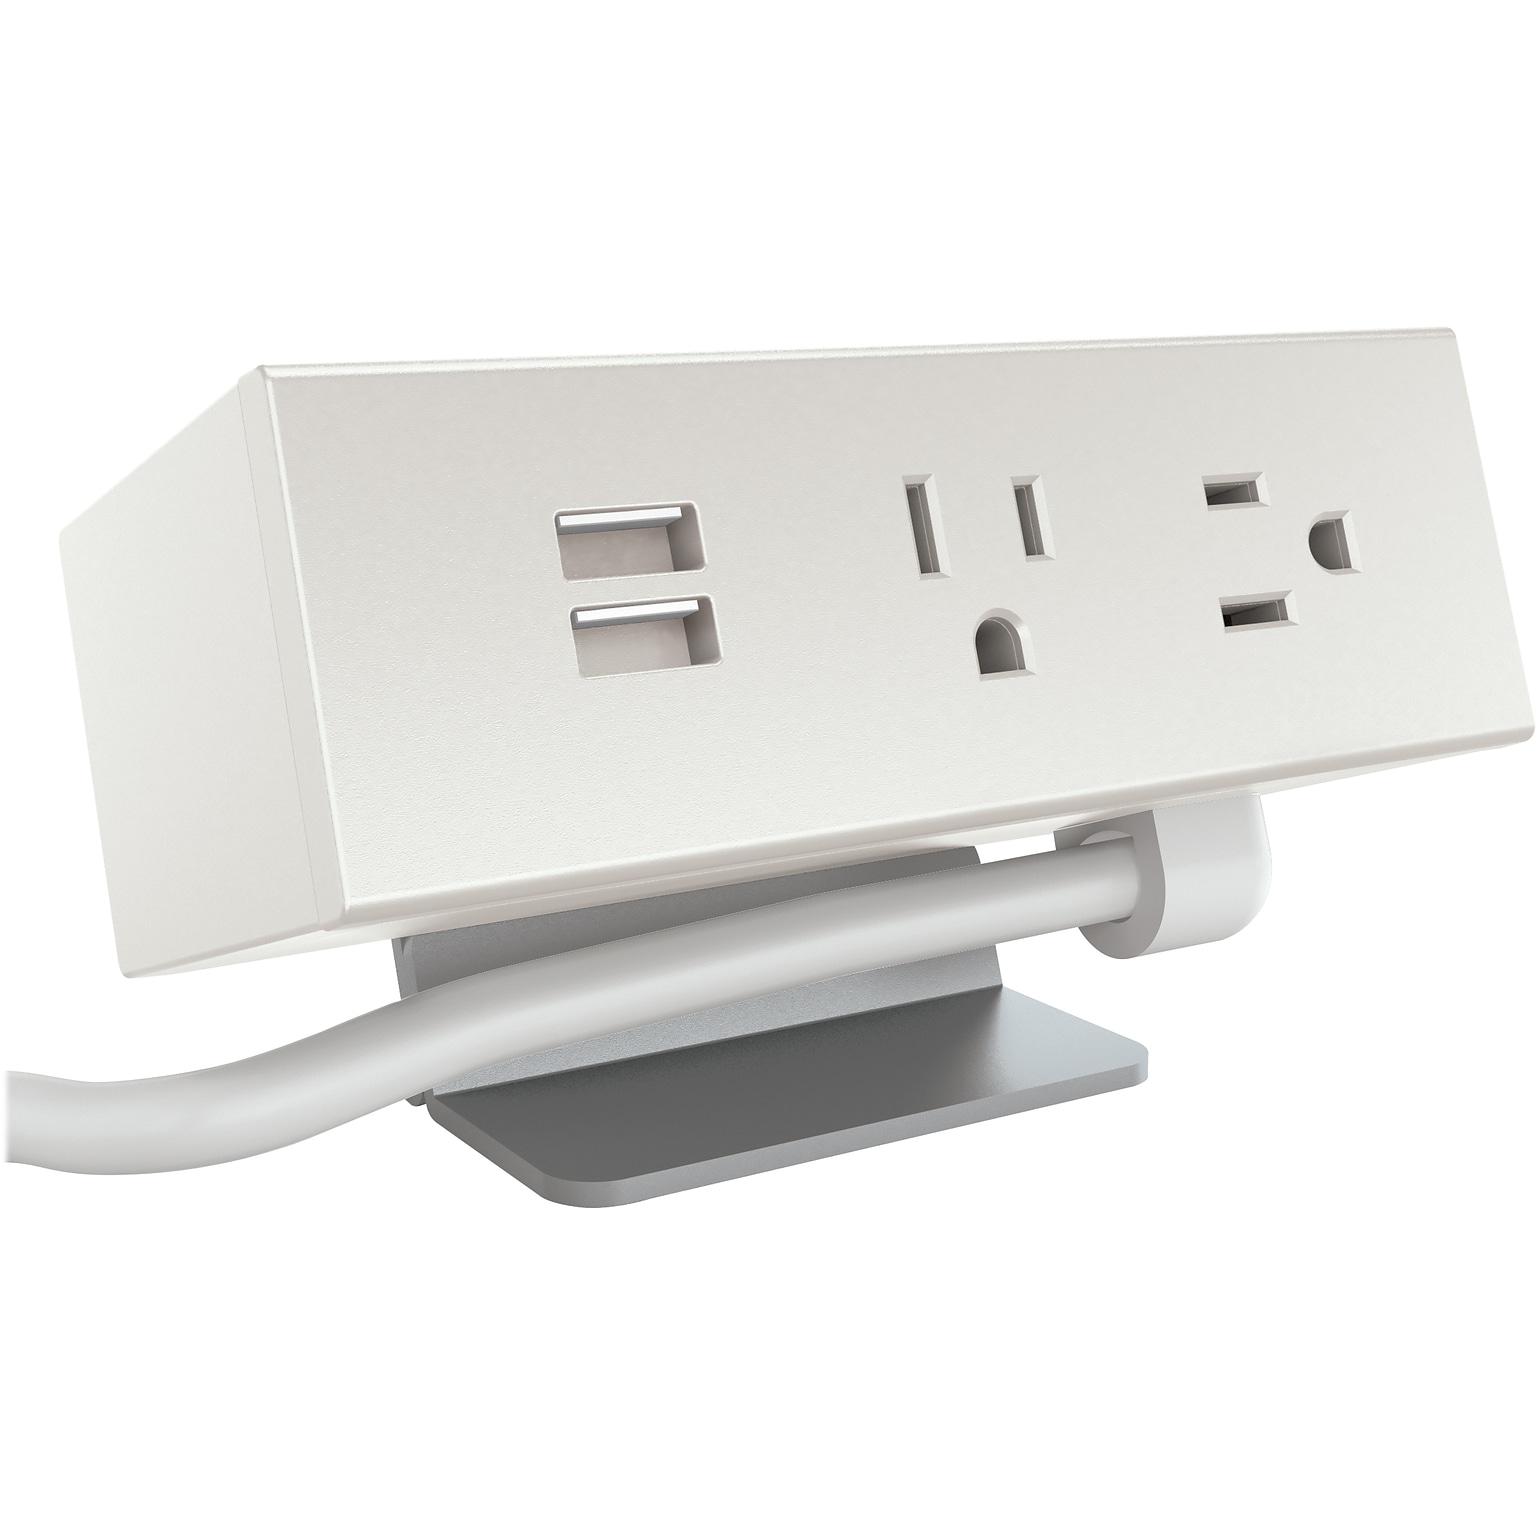 HON Power Distribution Module, 2-Outlet/2-USB (HPWRMOD2WC.SNW)